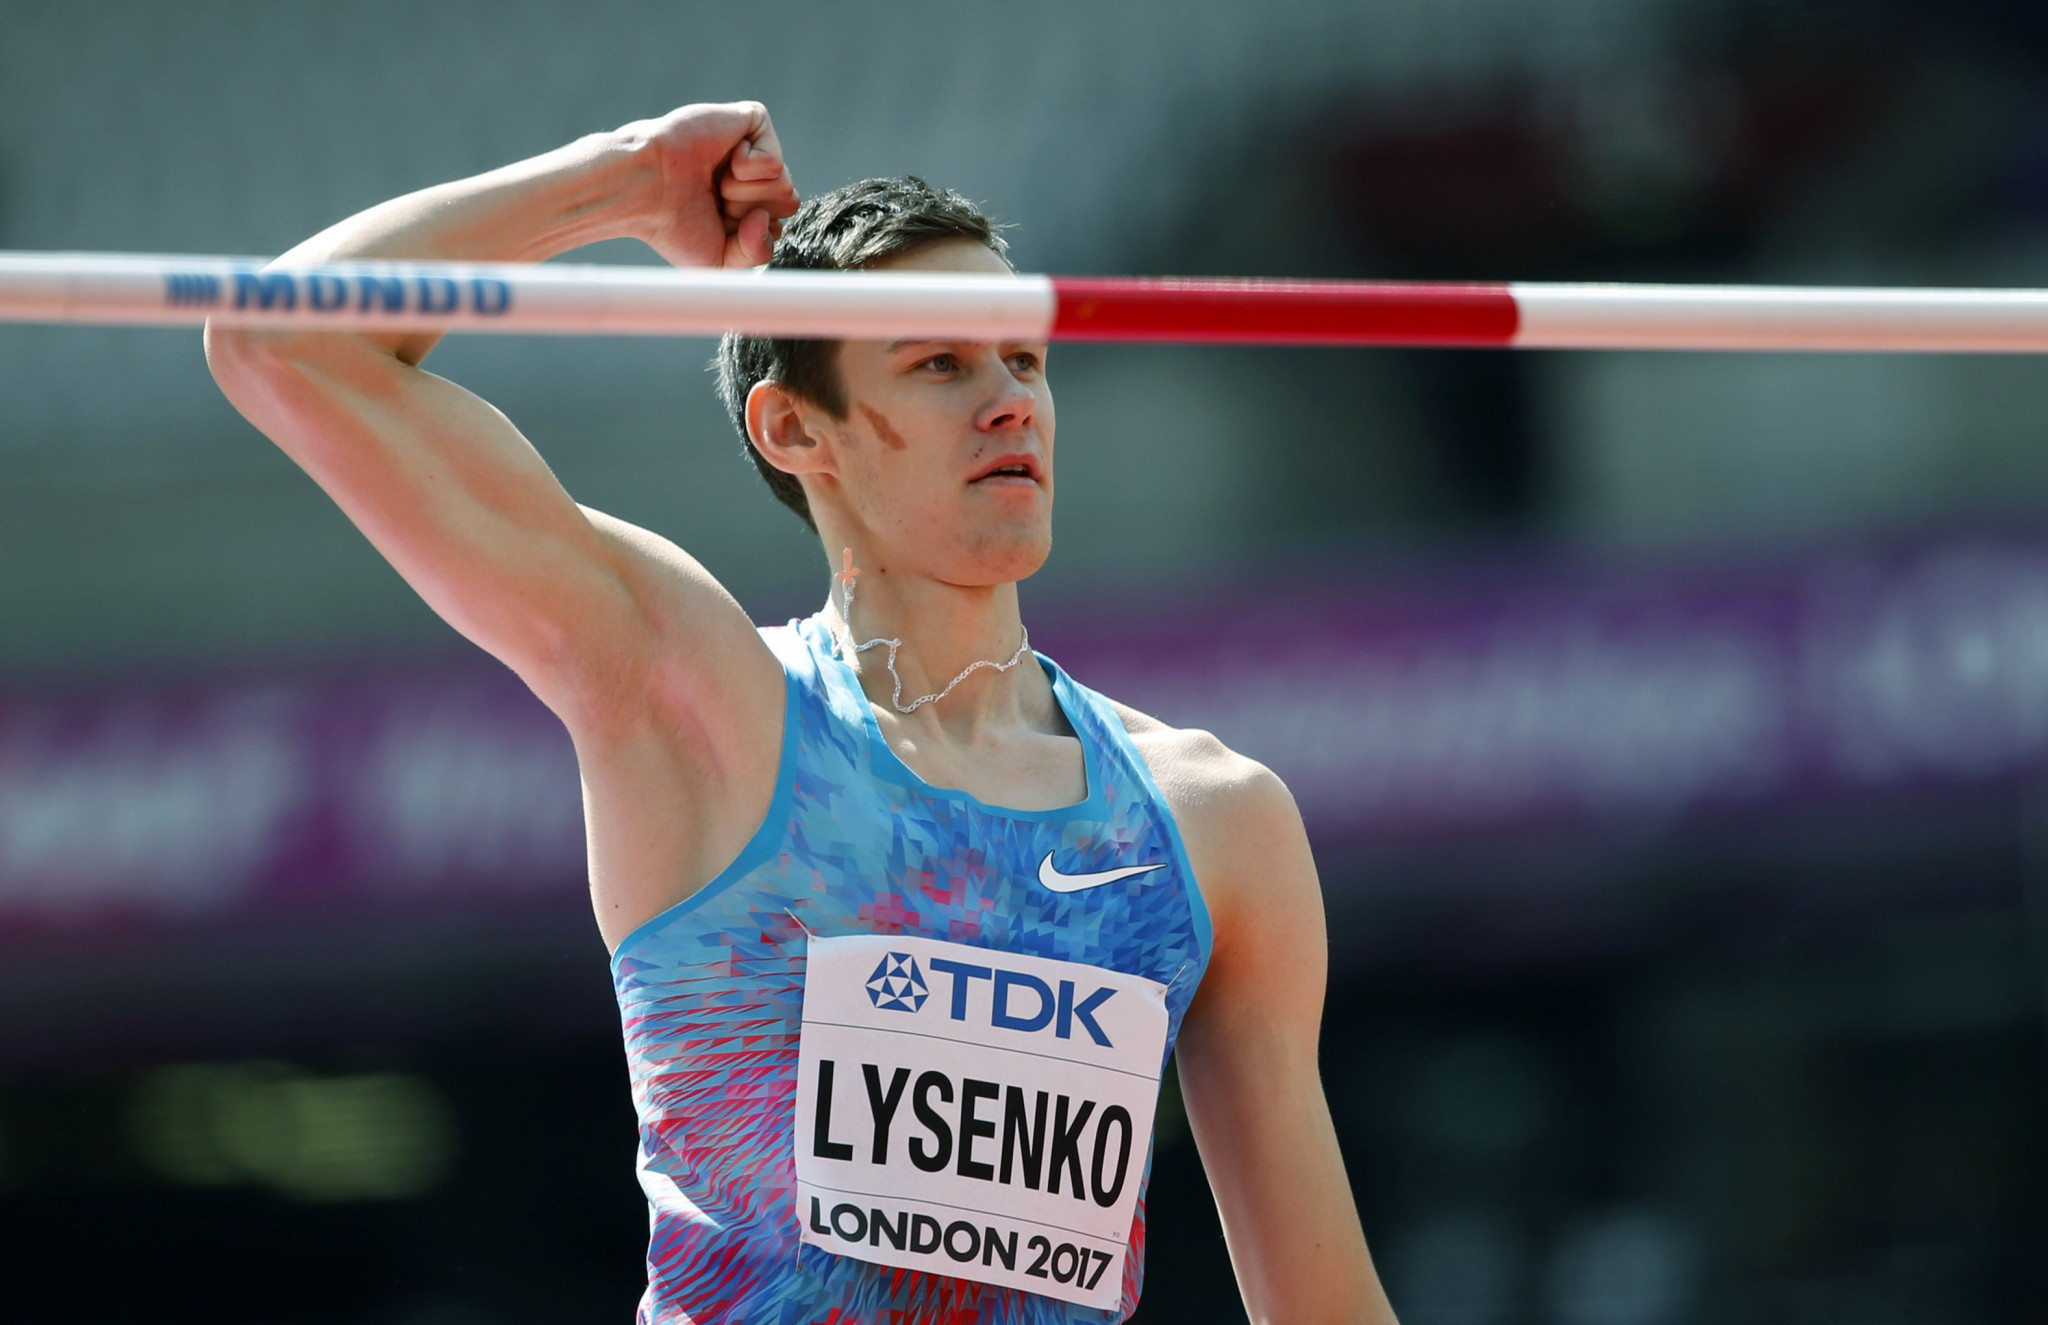 Russia's dispute with World Athletics centres around a missed doping test by high jumper Danil Lysenko ©Getty Images